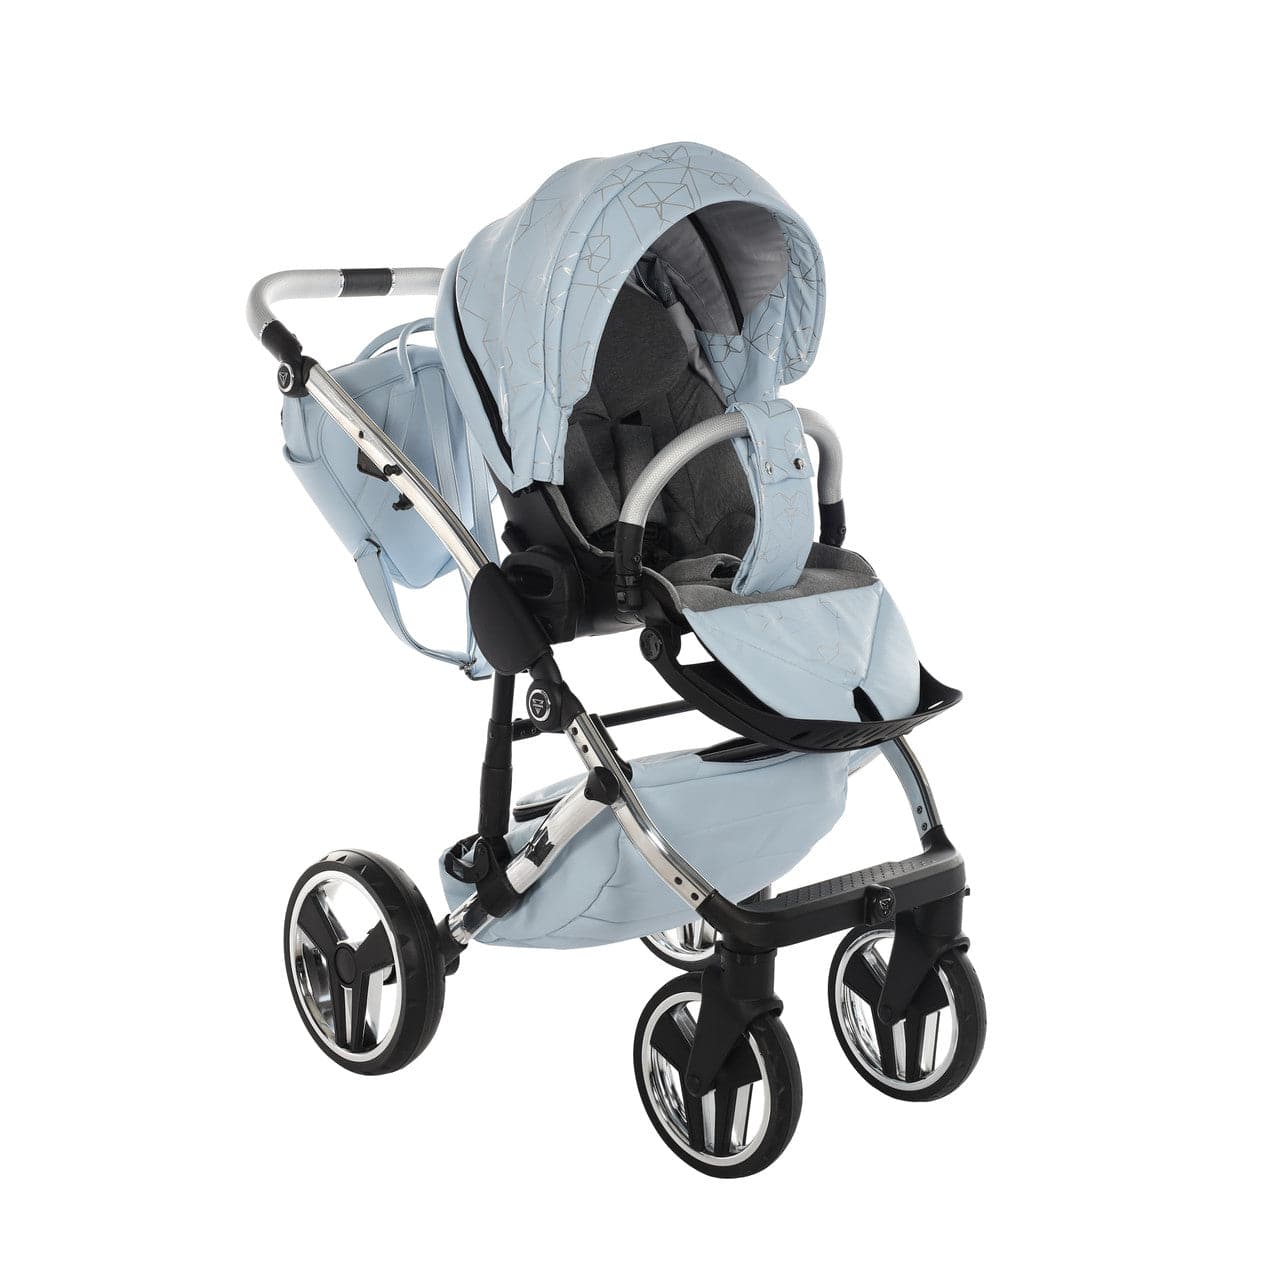 Junama Heart 3 In 1 Travel System - Blue - For Your Little One